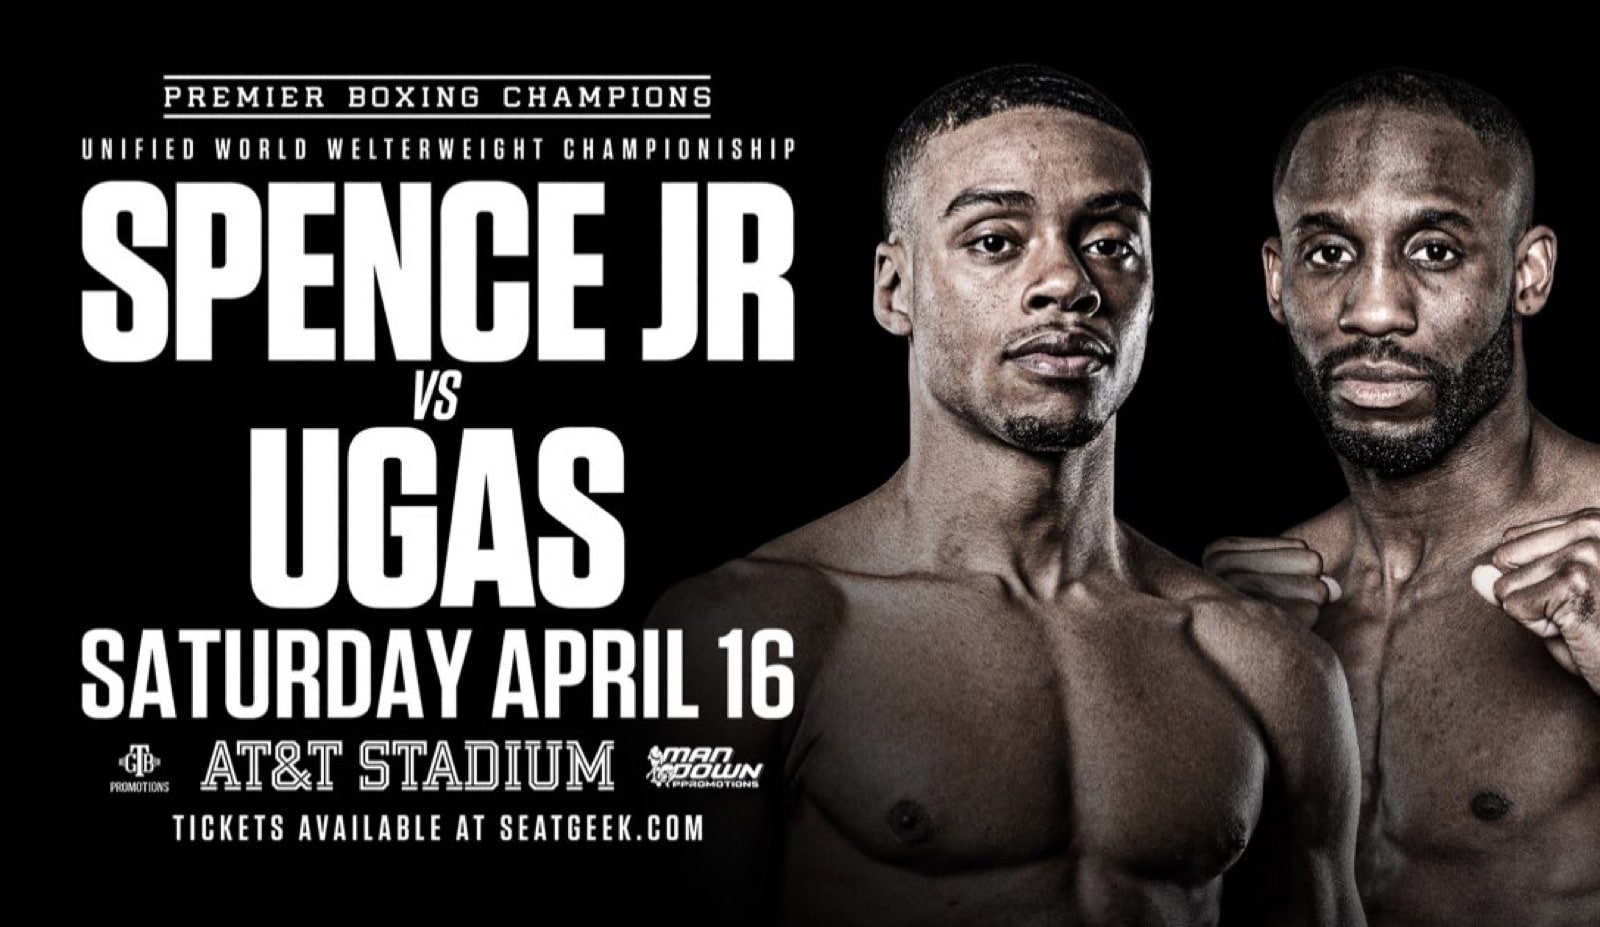 Spence vs Ugas Official For April 16, AT&T Stadium, Texas!